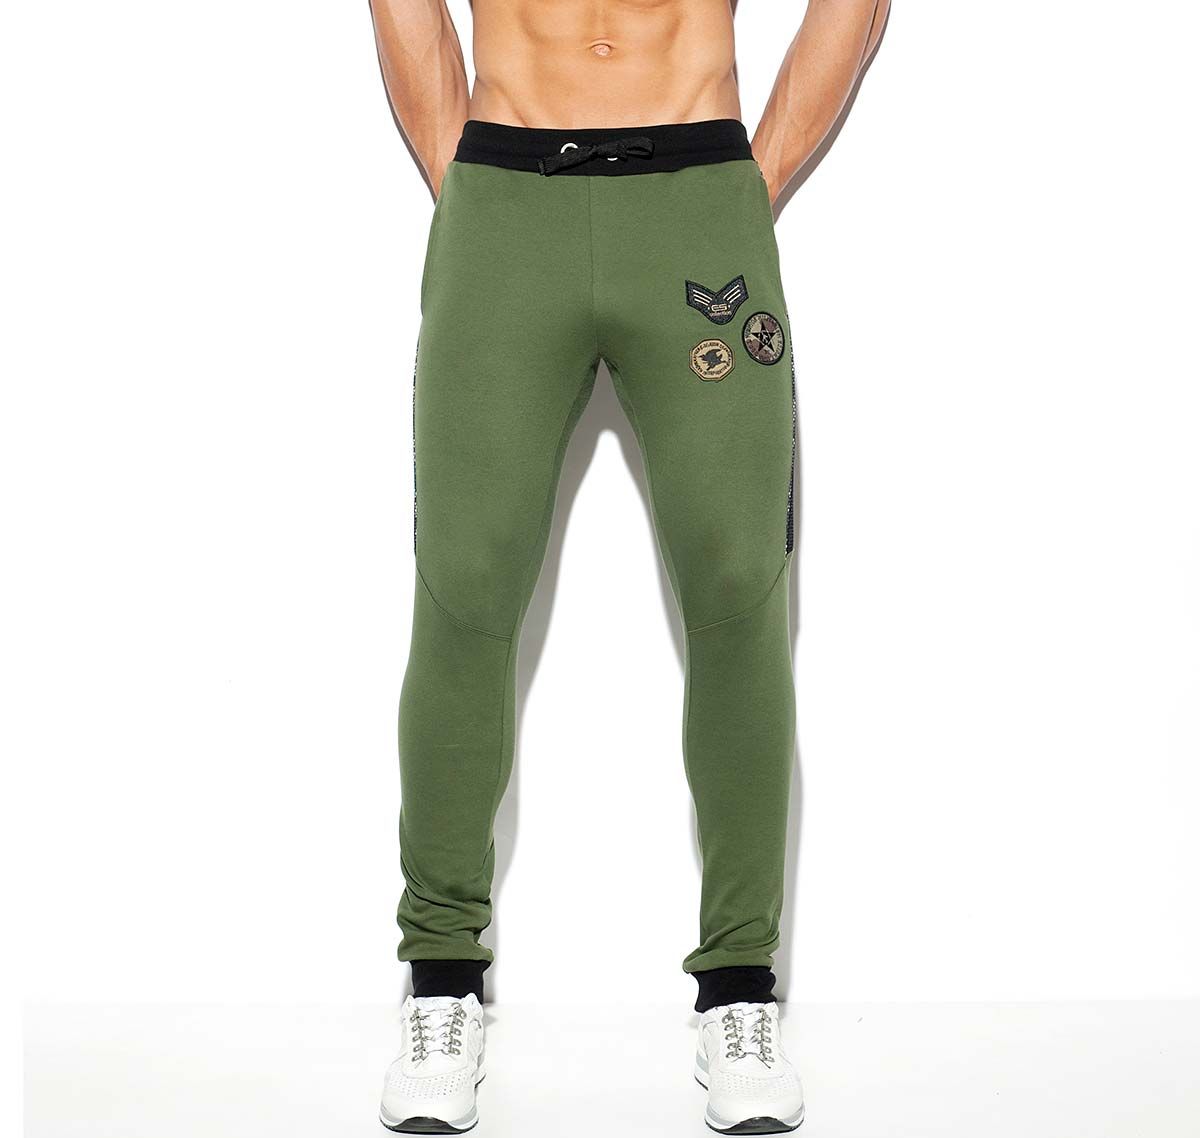 ES Collection Training pants ARMY PADDED SPORT PANTS SP221, green